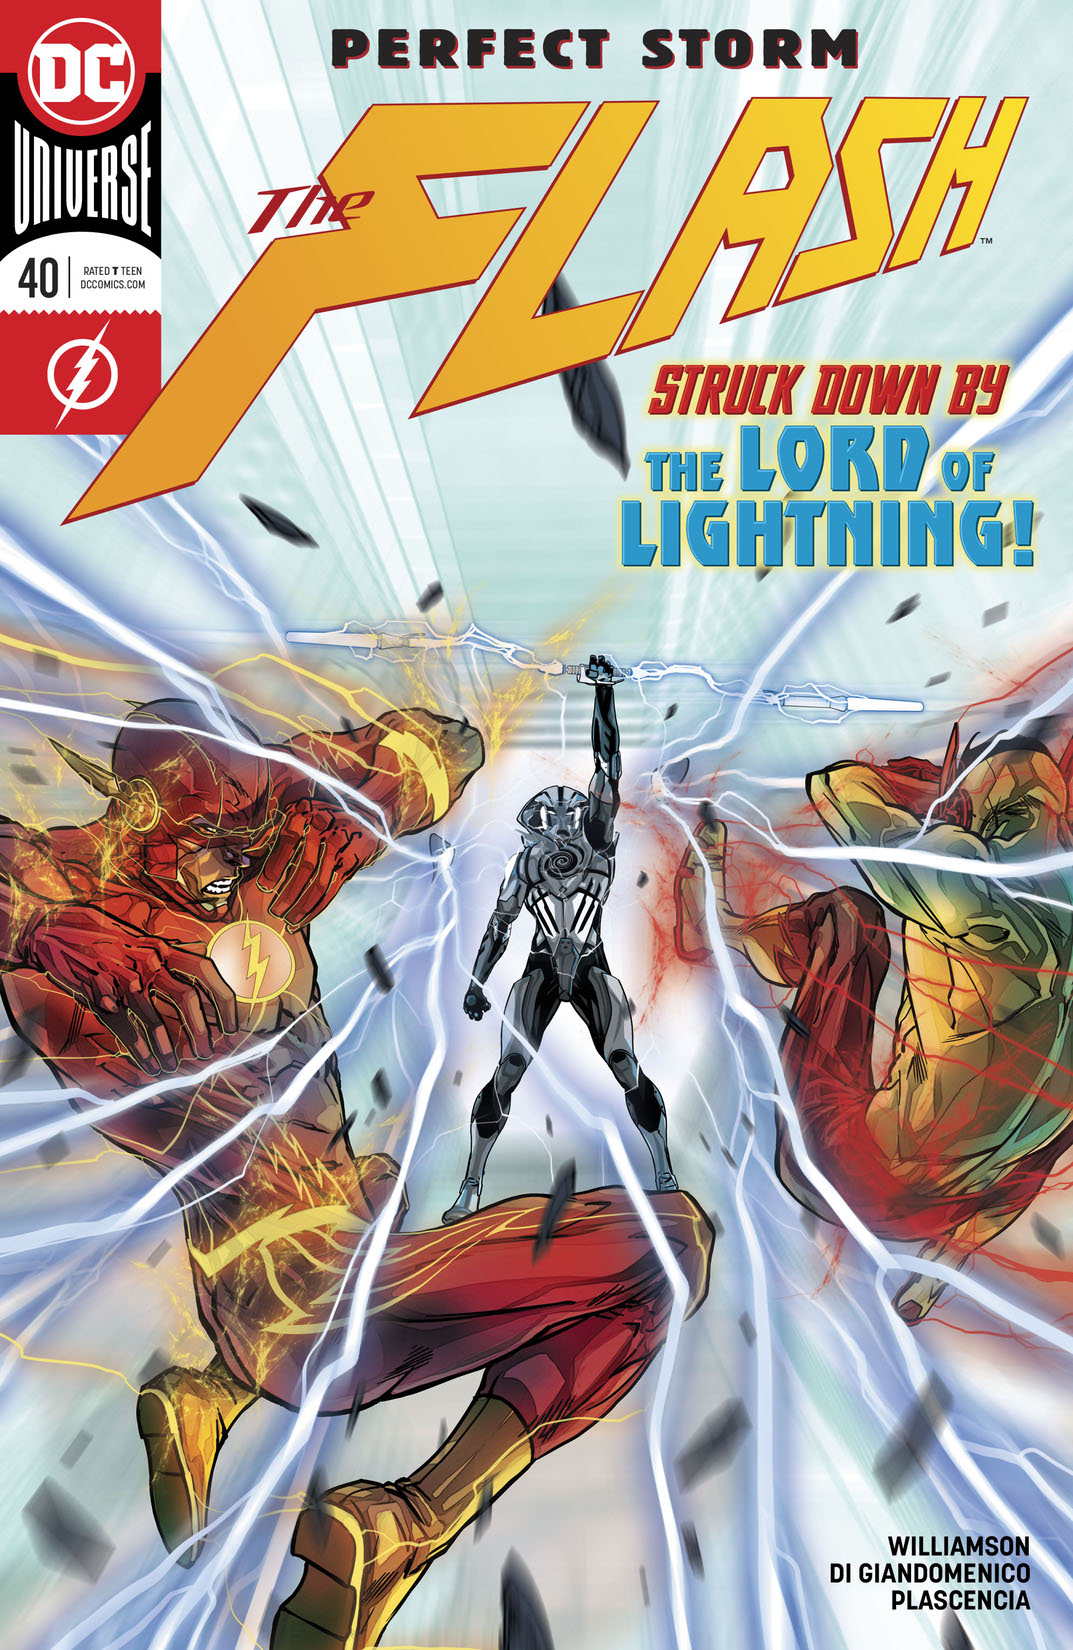 The Flash (2016-) #40 preview images